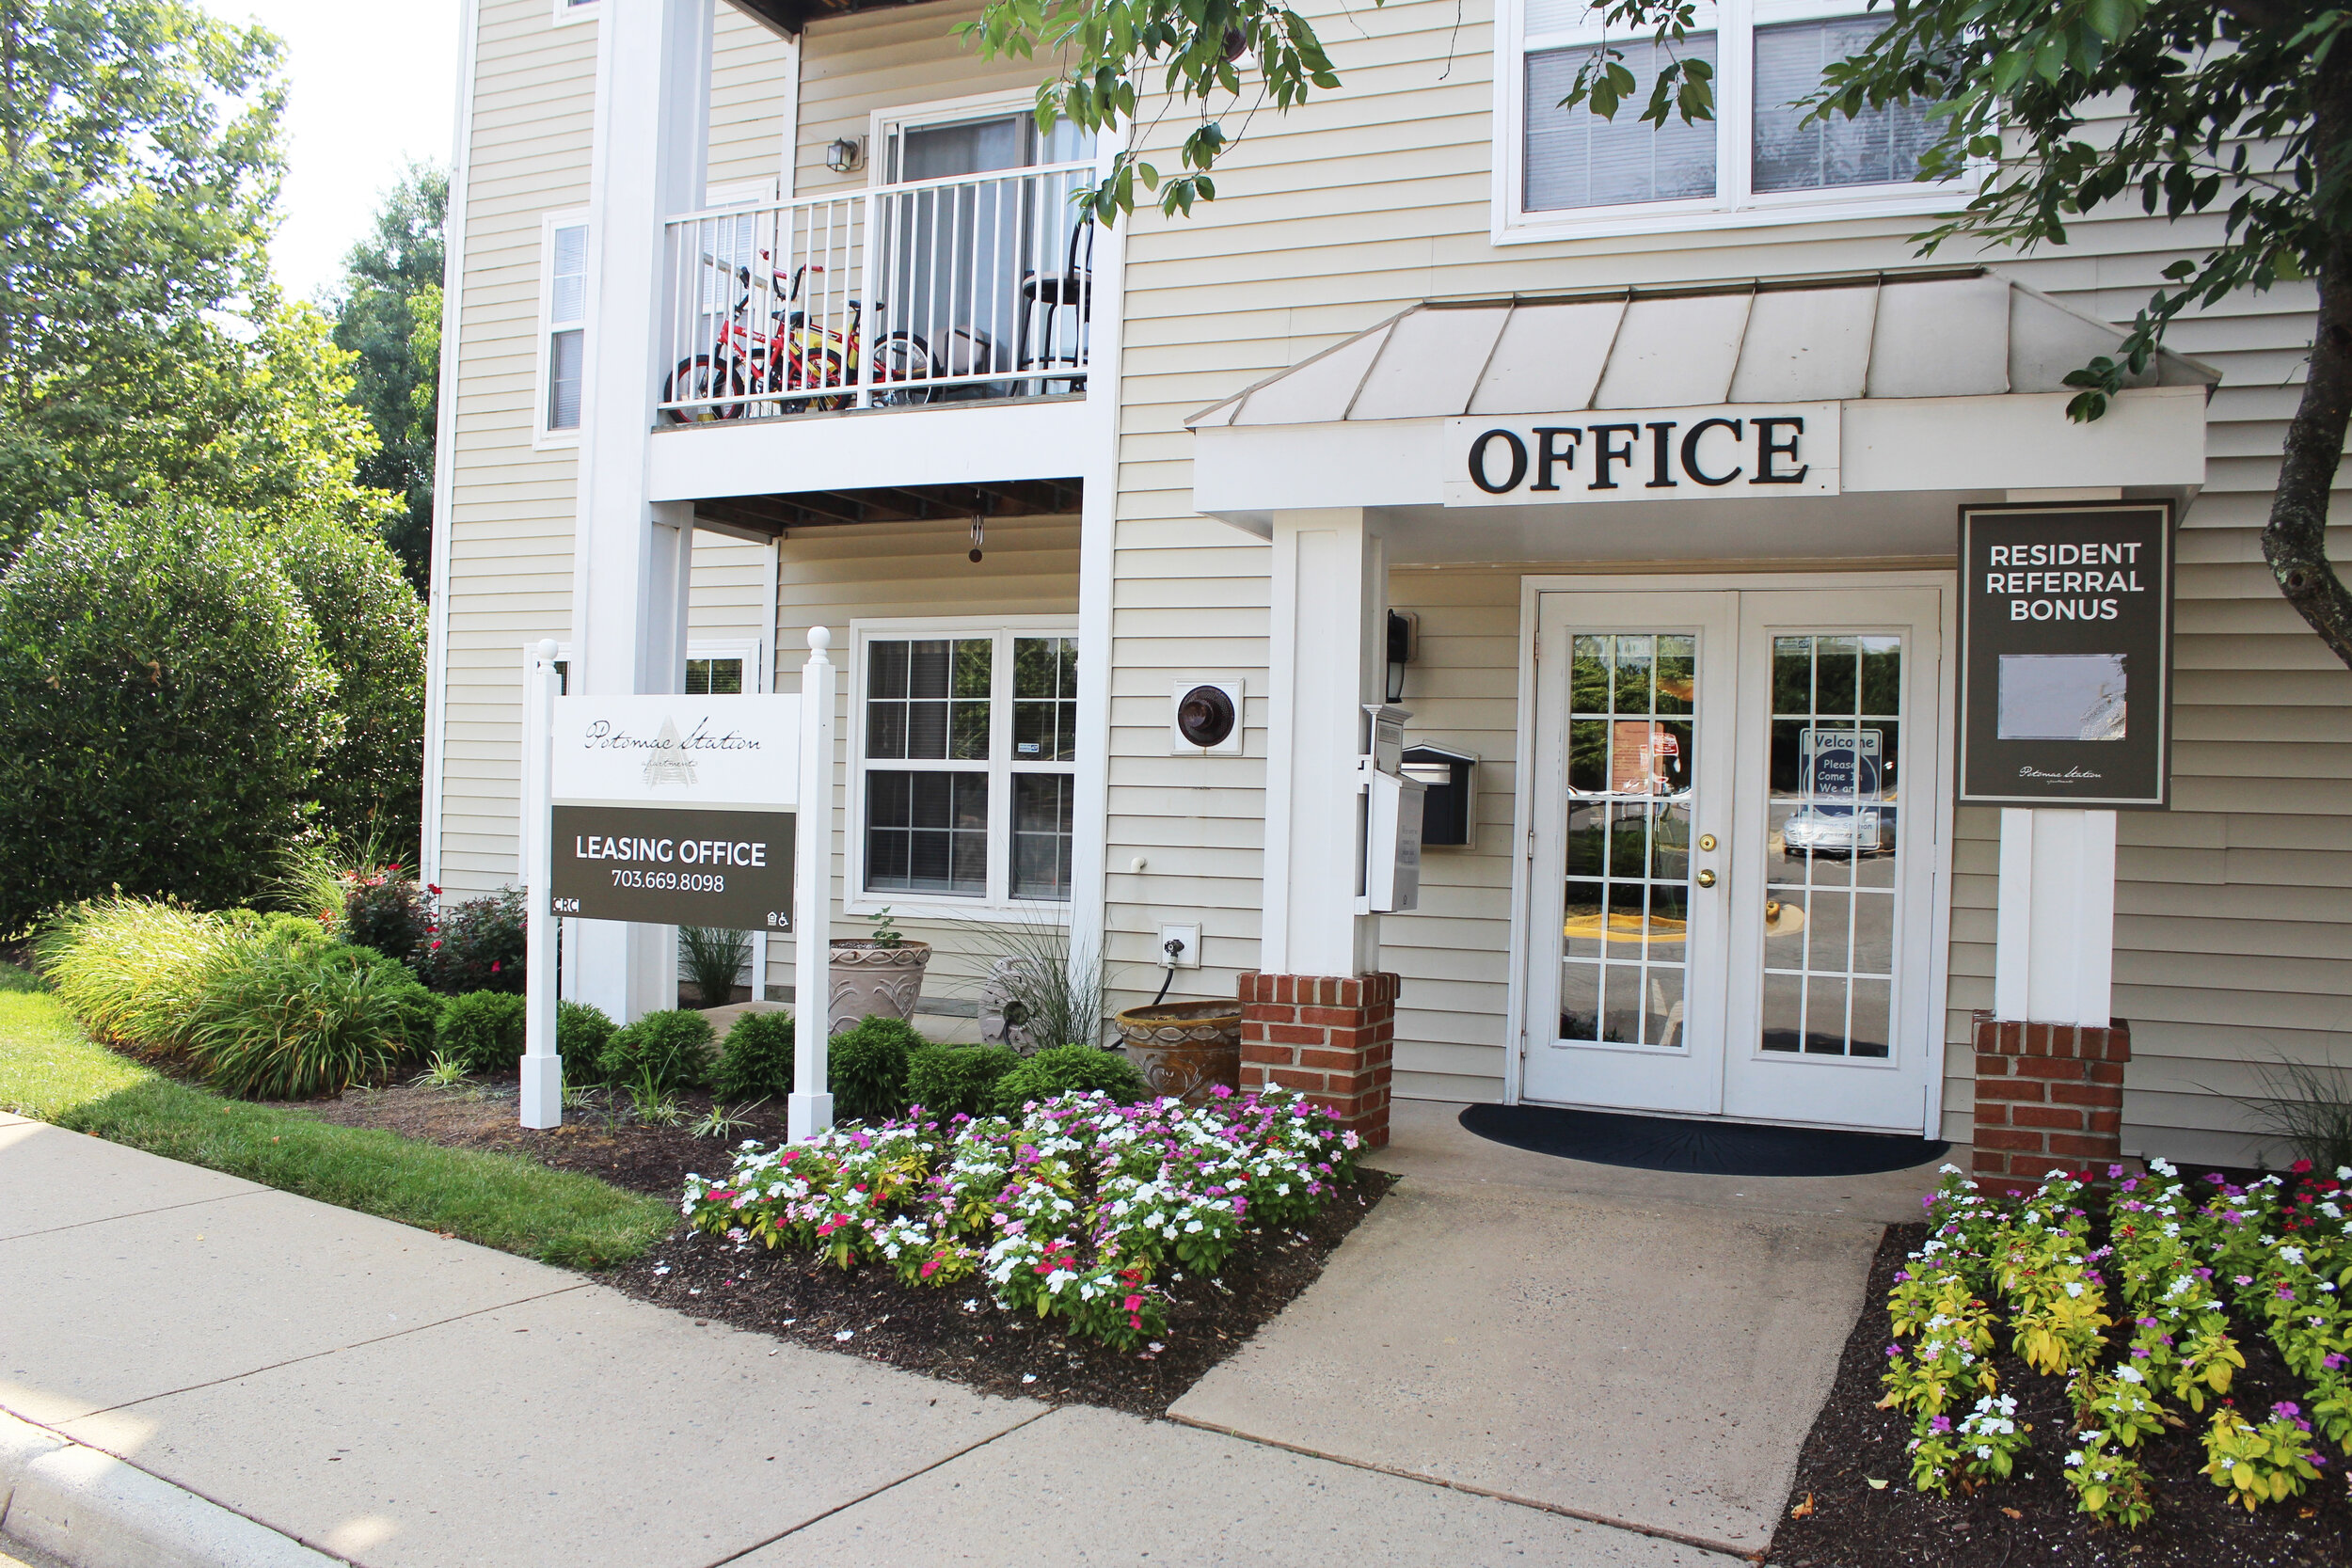  Find spacious 2BR and 3BR homes at Potomac Station Apartments. 